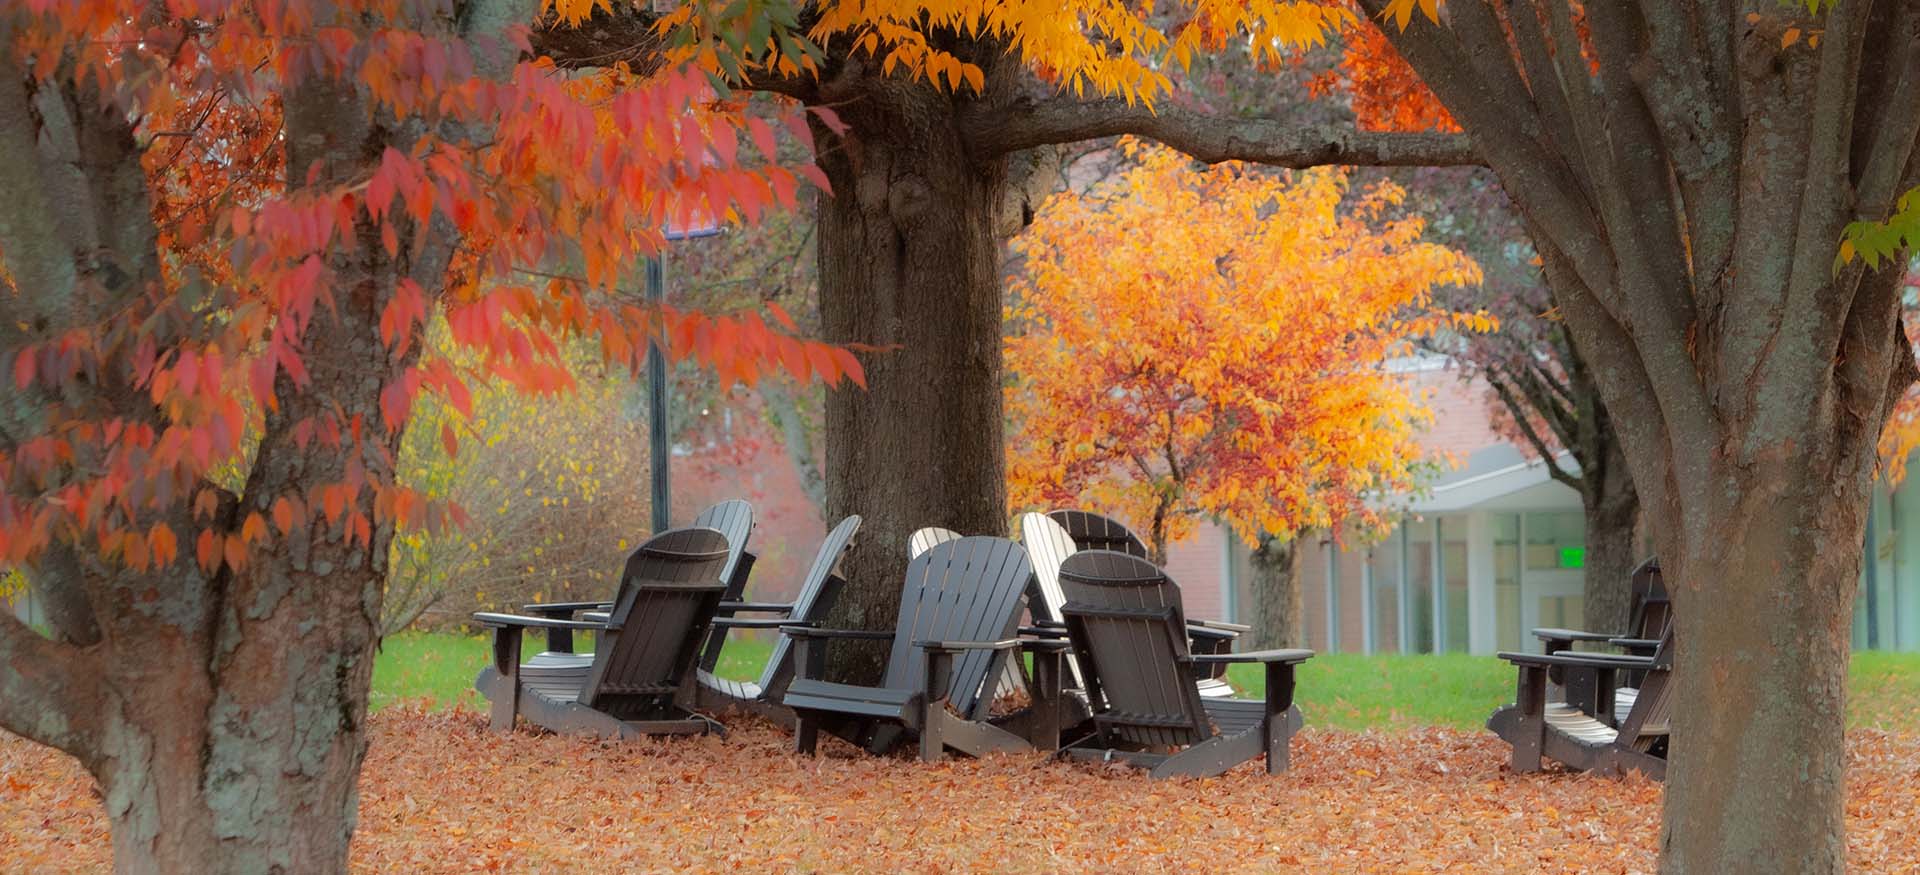 outdoor chairs surrounded by orange leaves